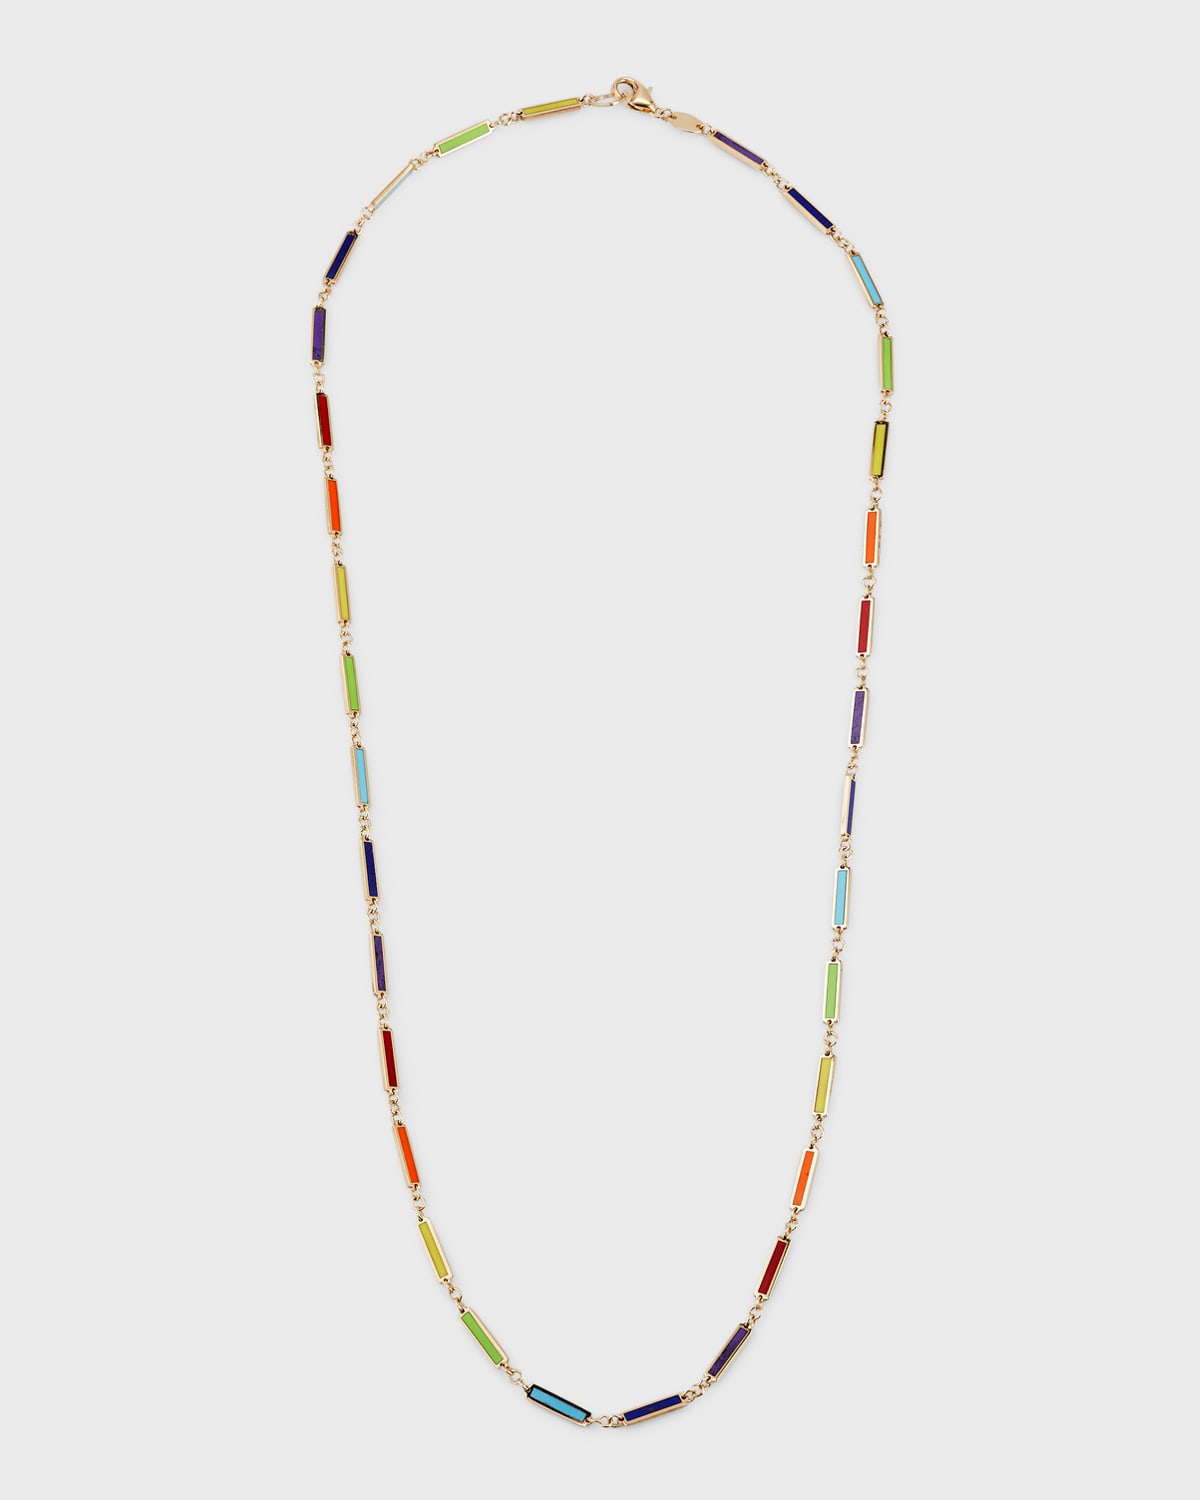 18K Yellow Gold Rainbow Inlay Necklace, 18"L